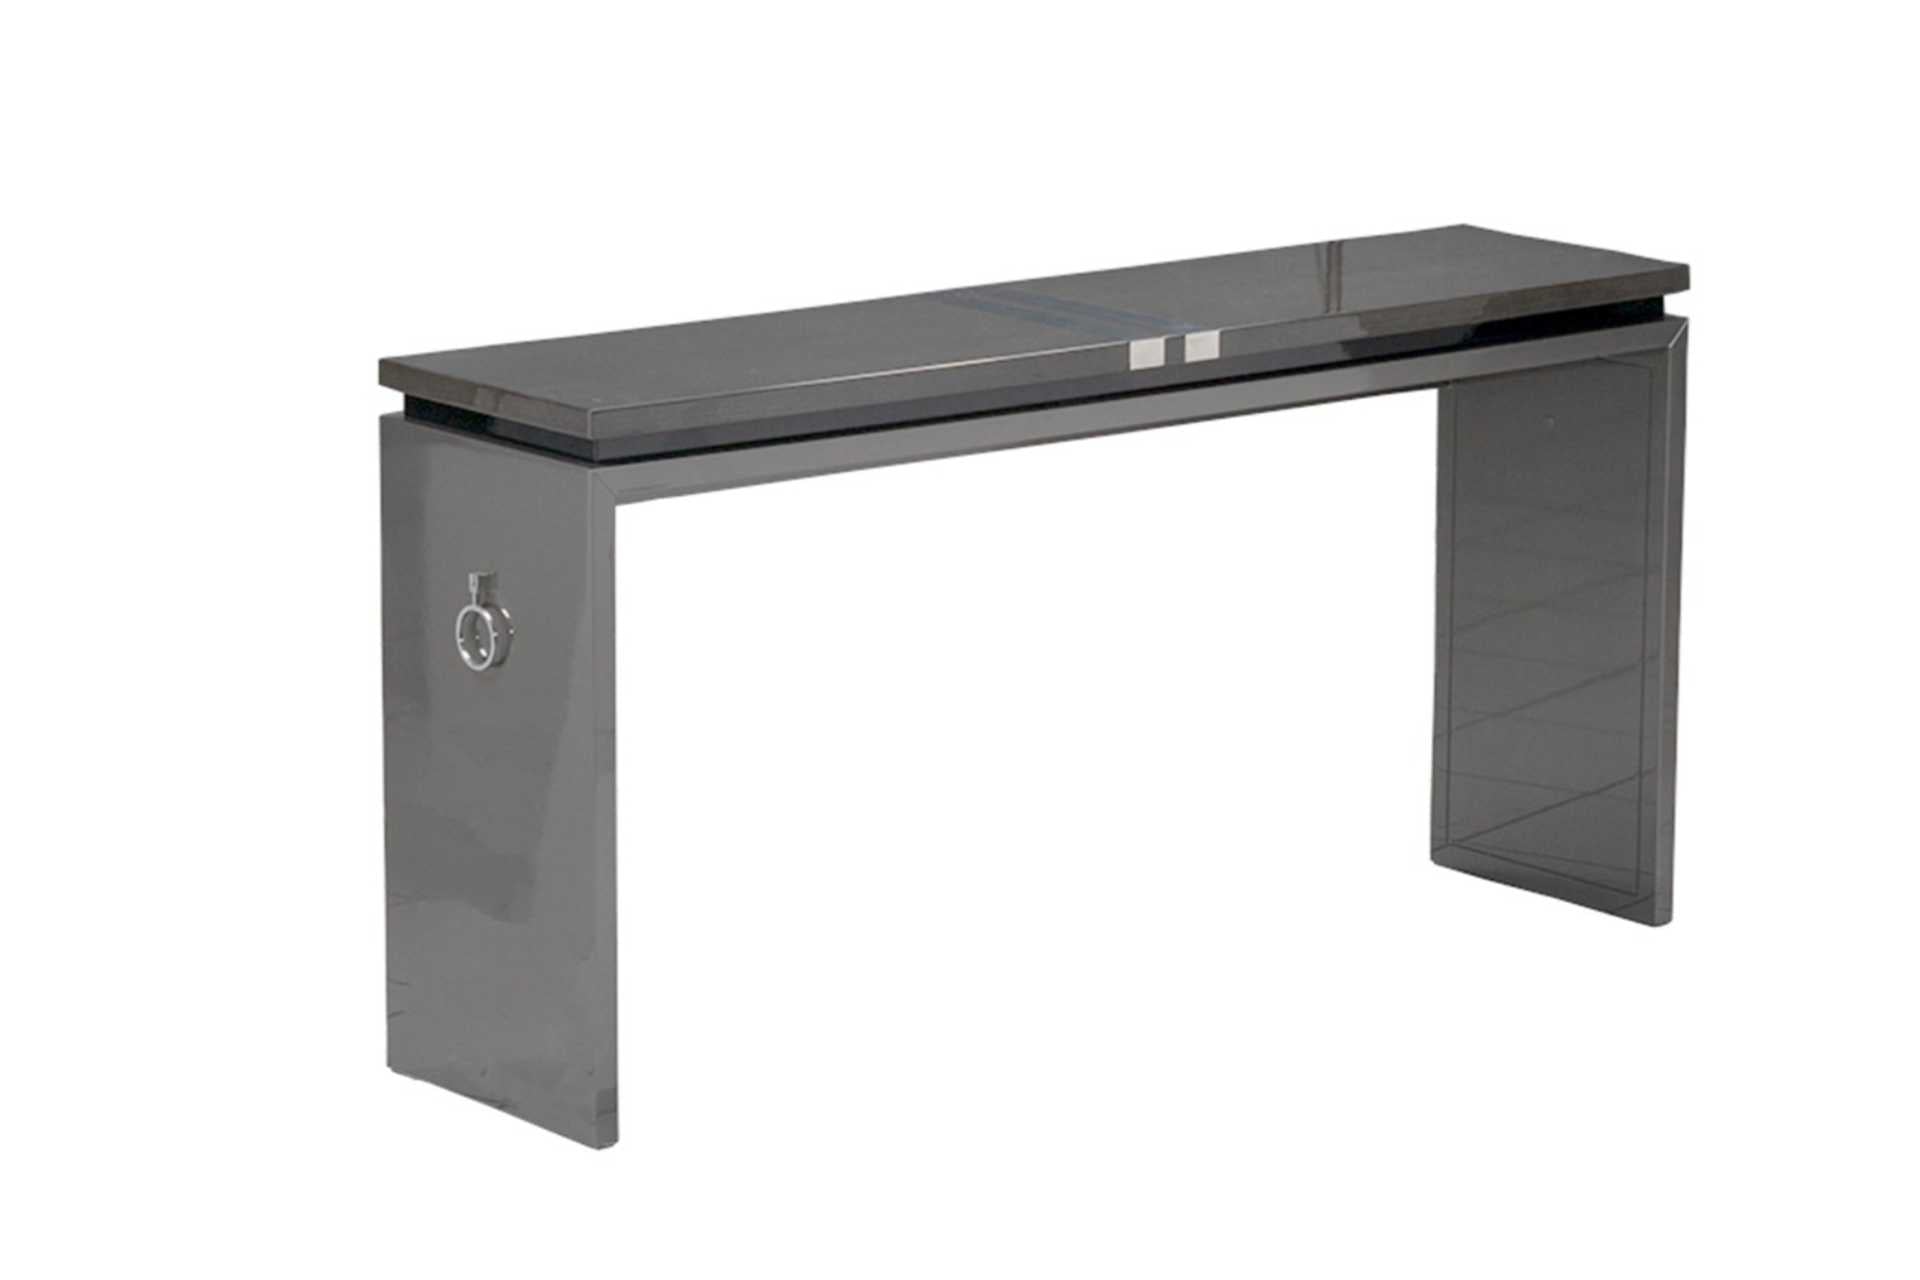 Gloss grey wood console with silver detailing. Handmade in Europe